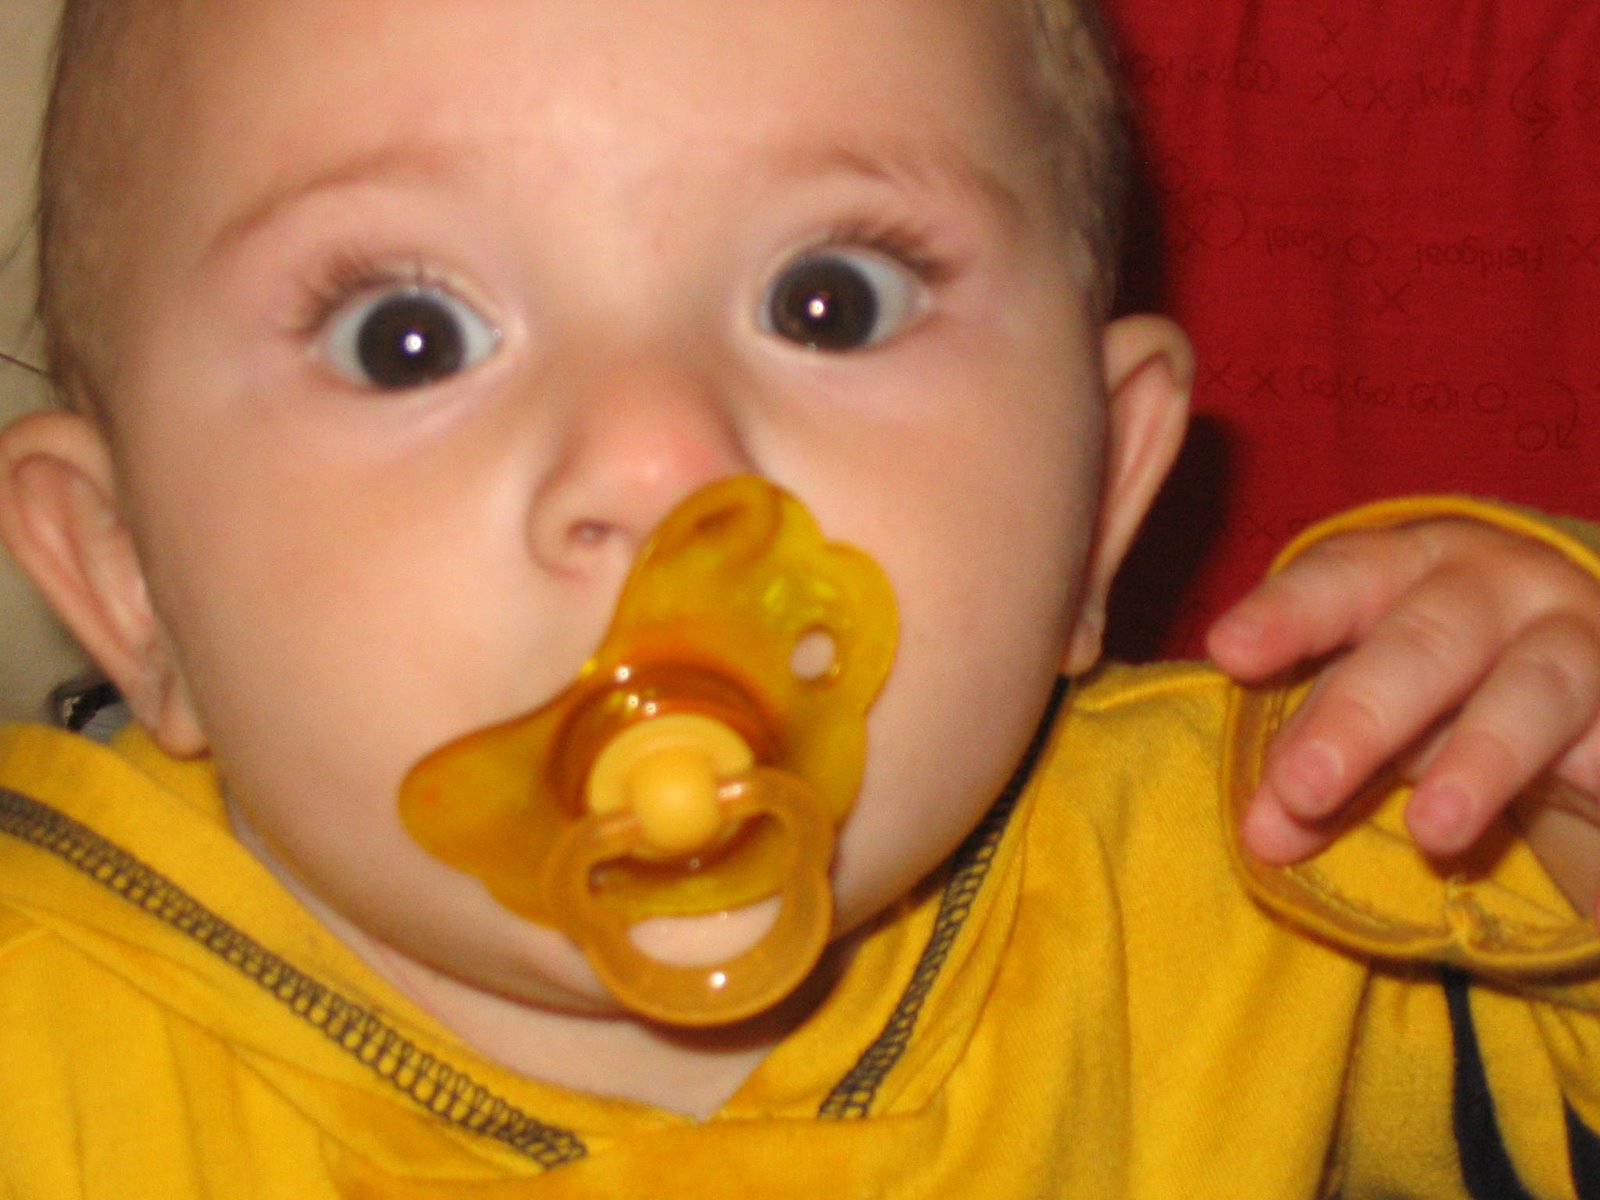 [JZ+and+Pacifier+-+Looking+up.JPG]